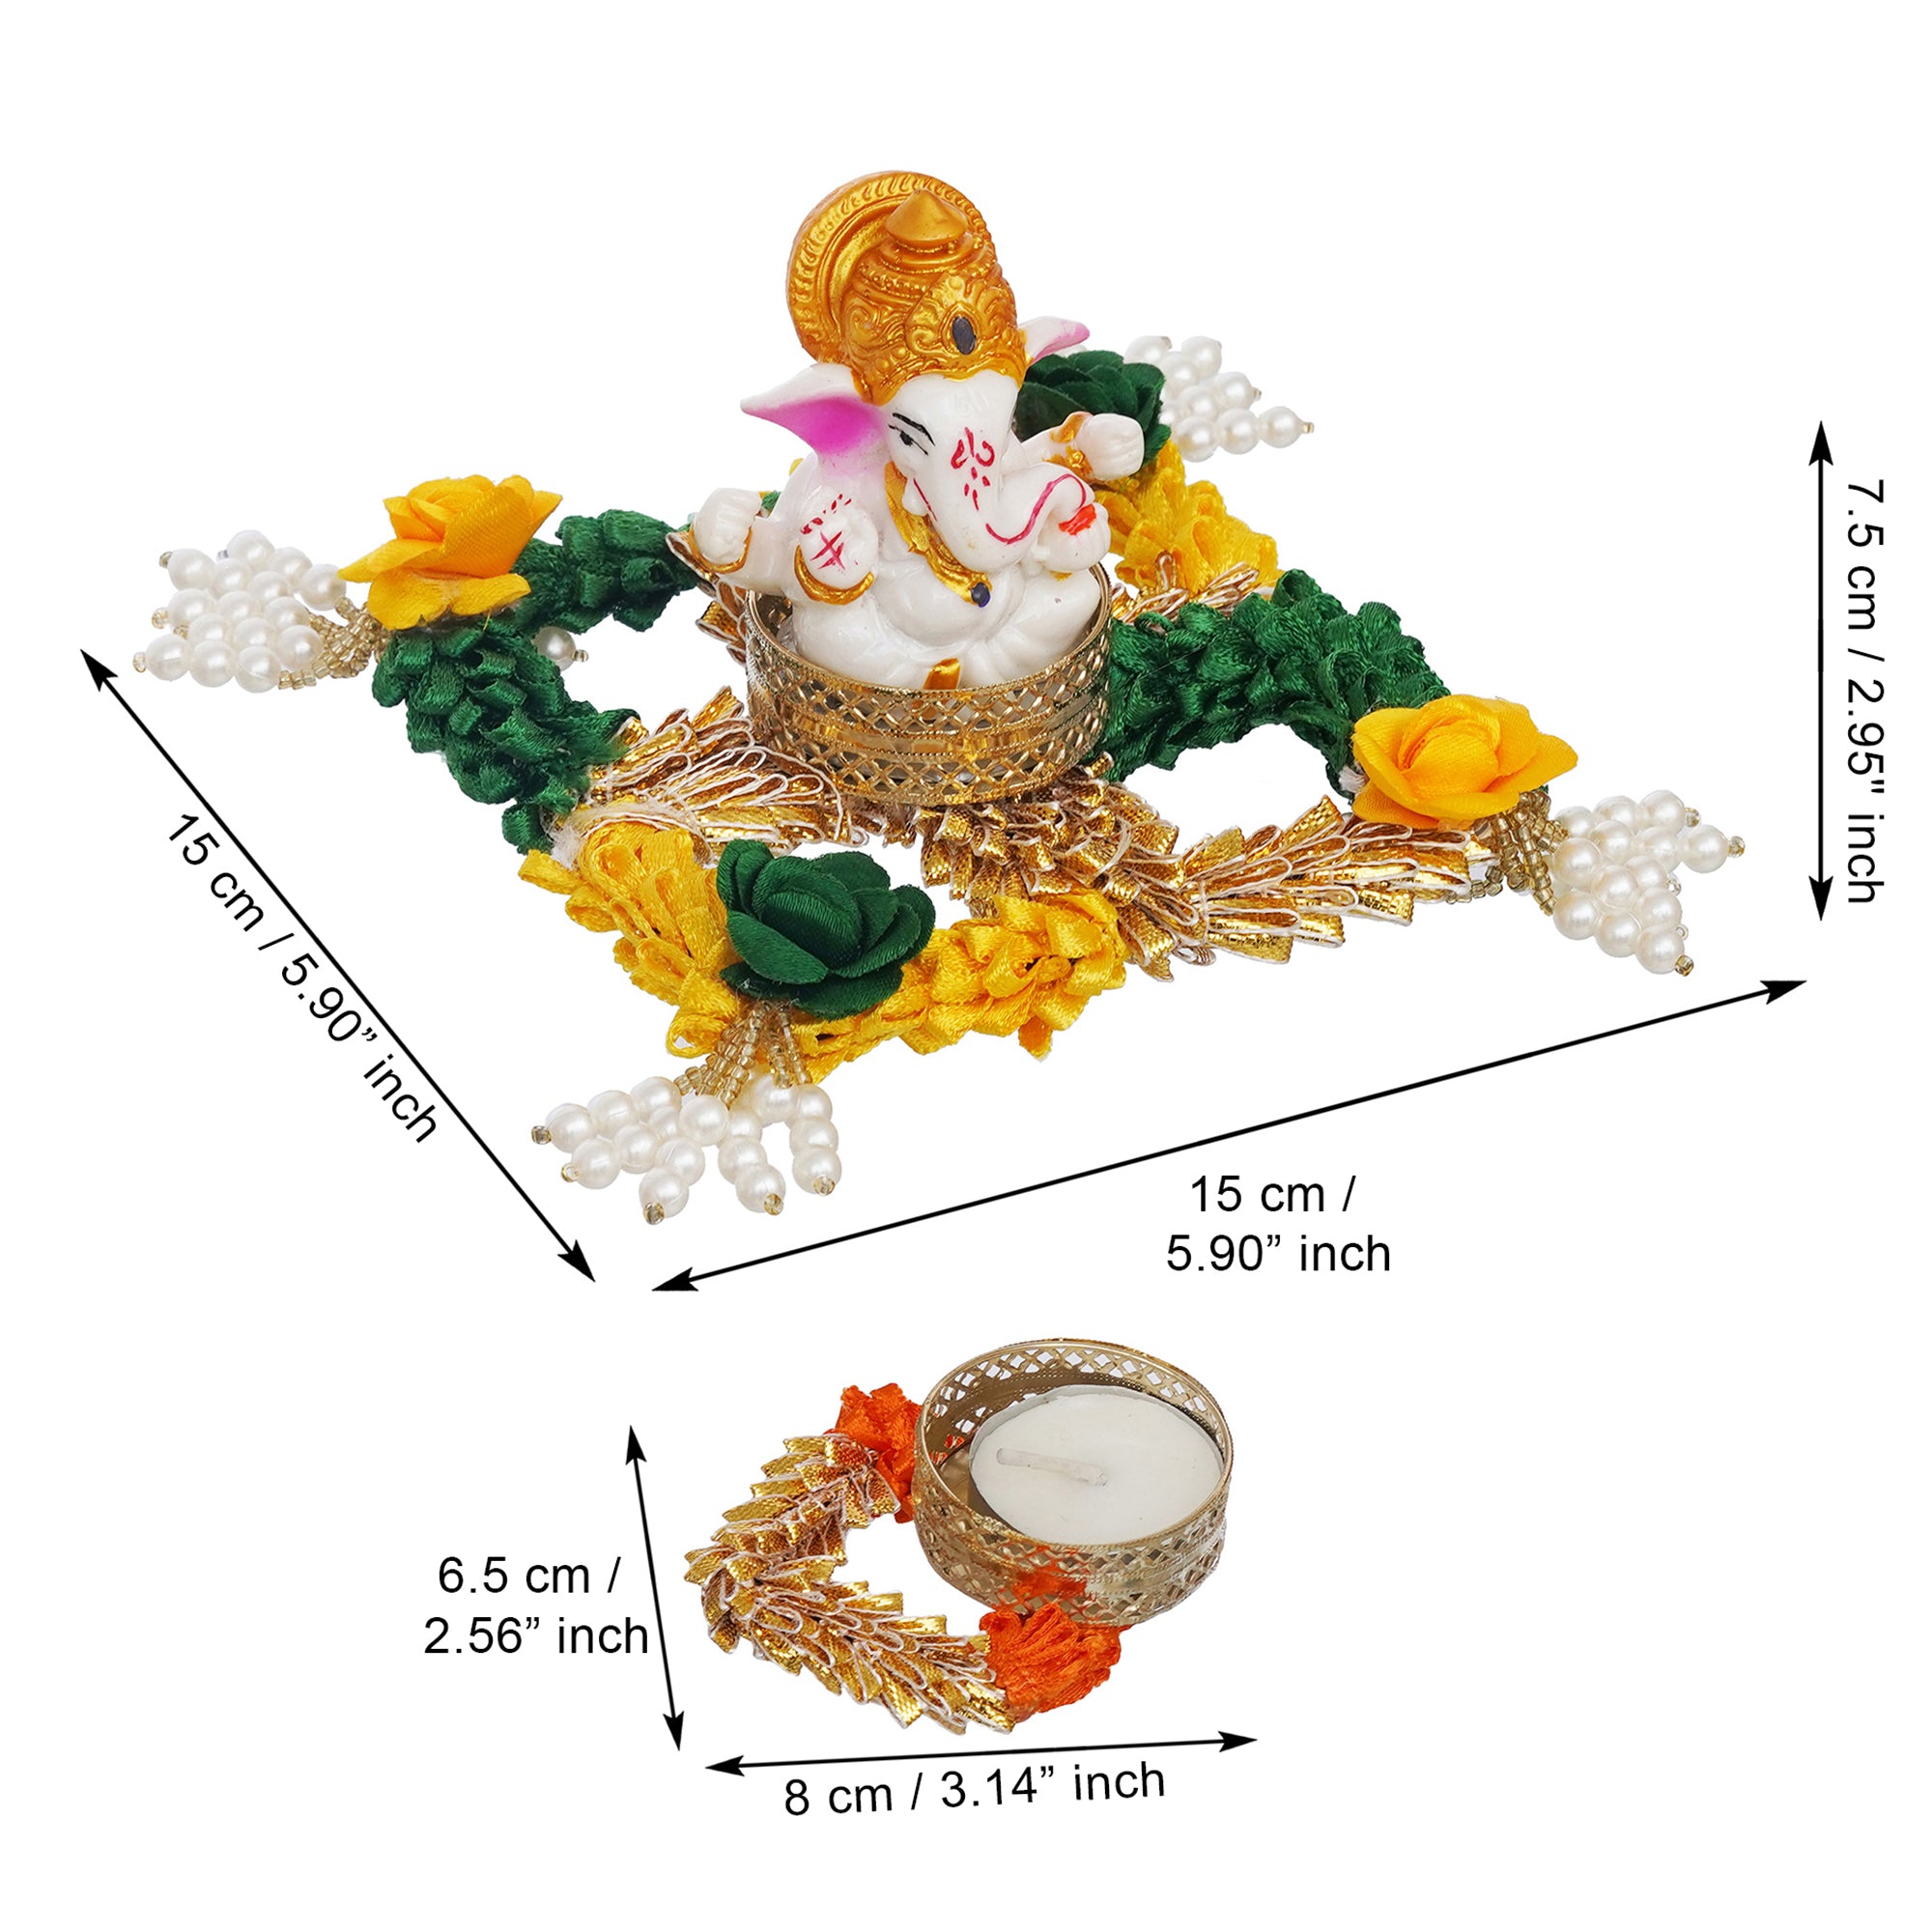 eCraftIndia Lord Ganesha Idol on Floral and Beads Embellished Handcrafted Plate with 4 Decorative Tea Light Candle Holders 3